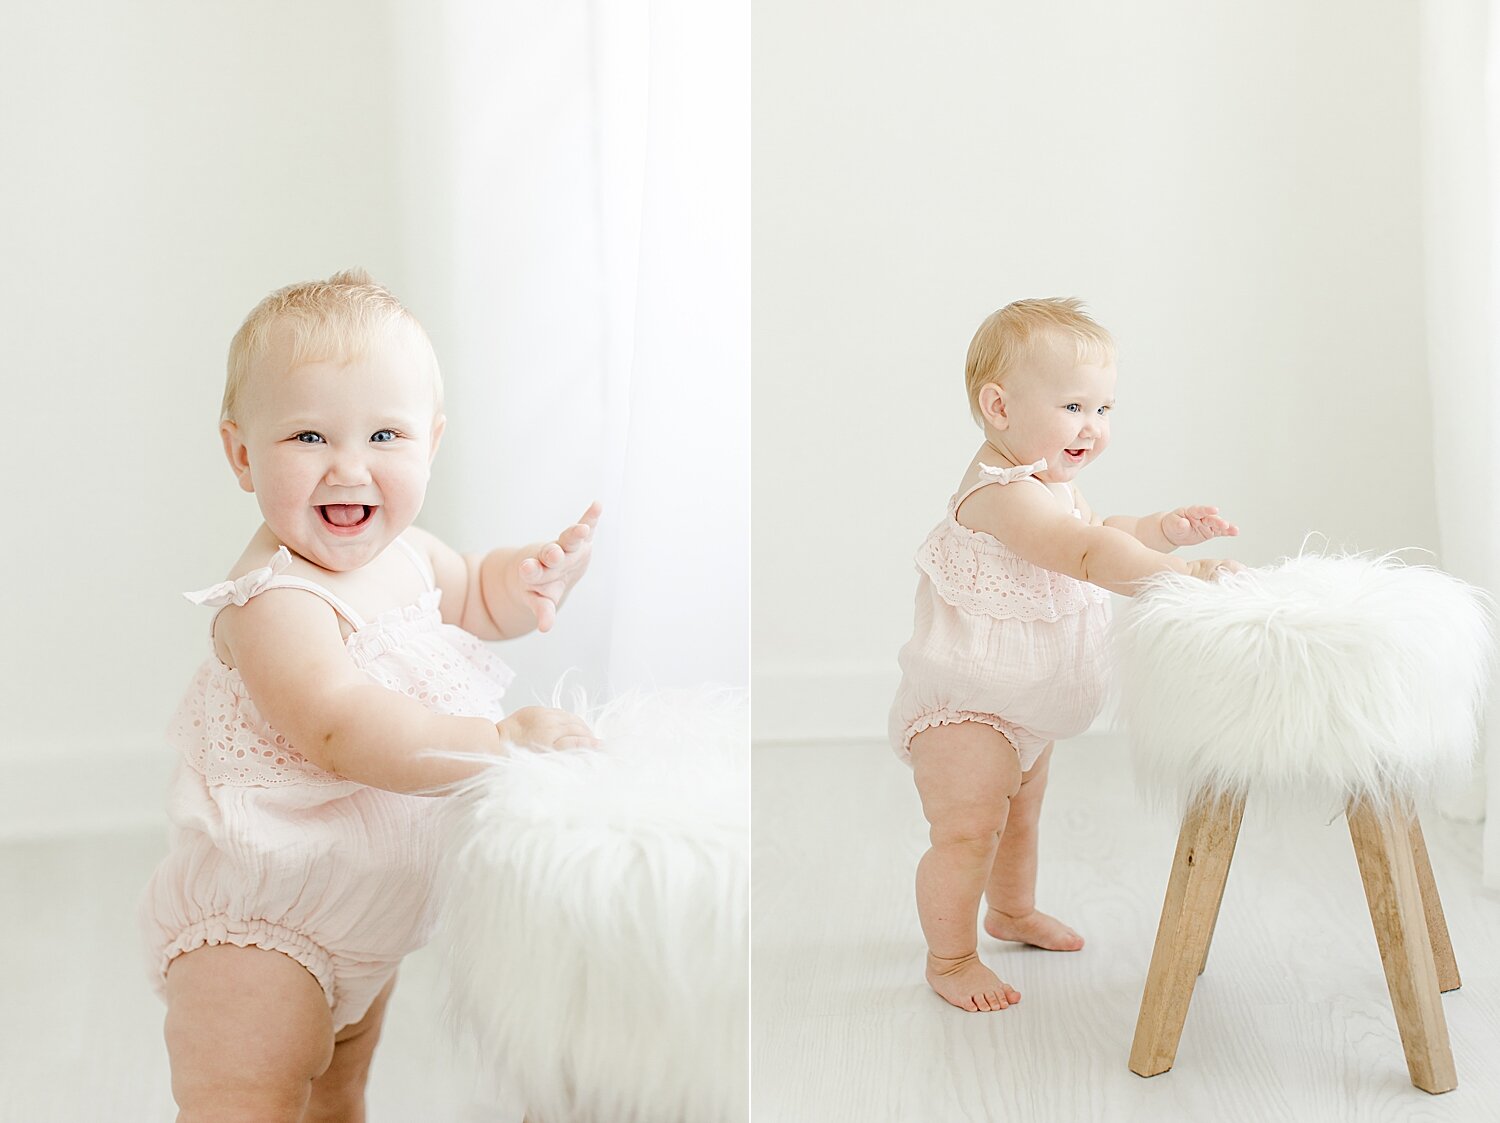 Studio milestone session for baby girl in Westport CT studio. Photo by Kristin Wood Photography.